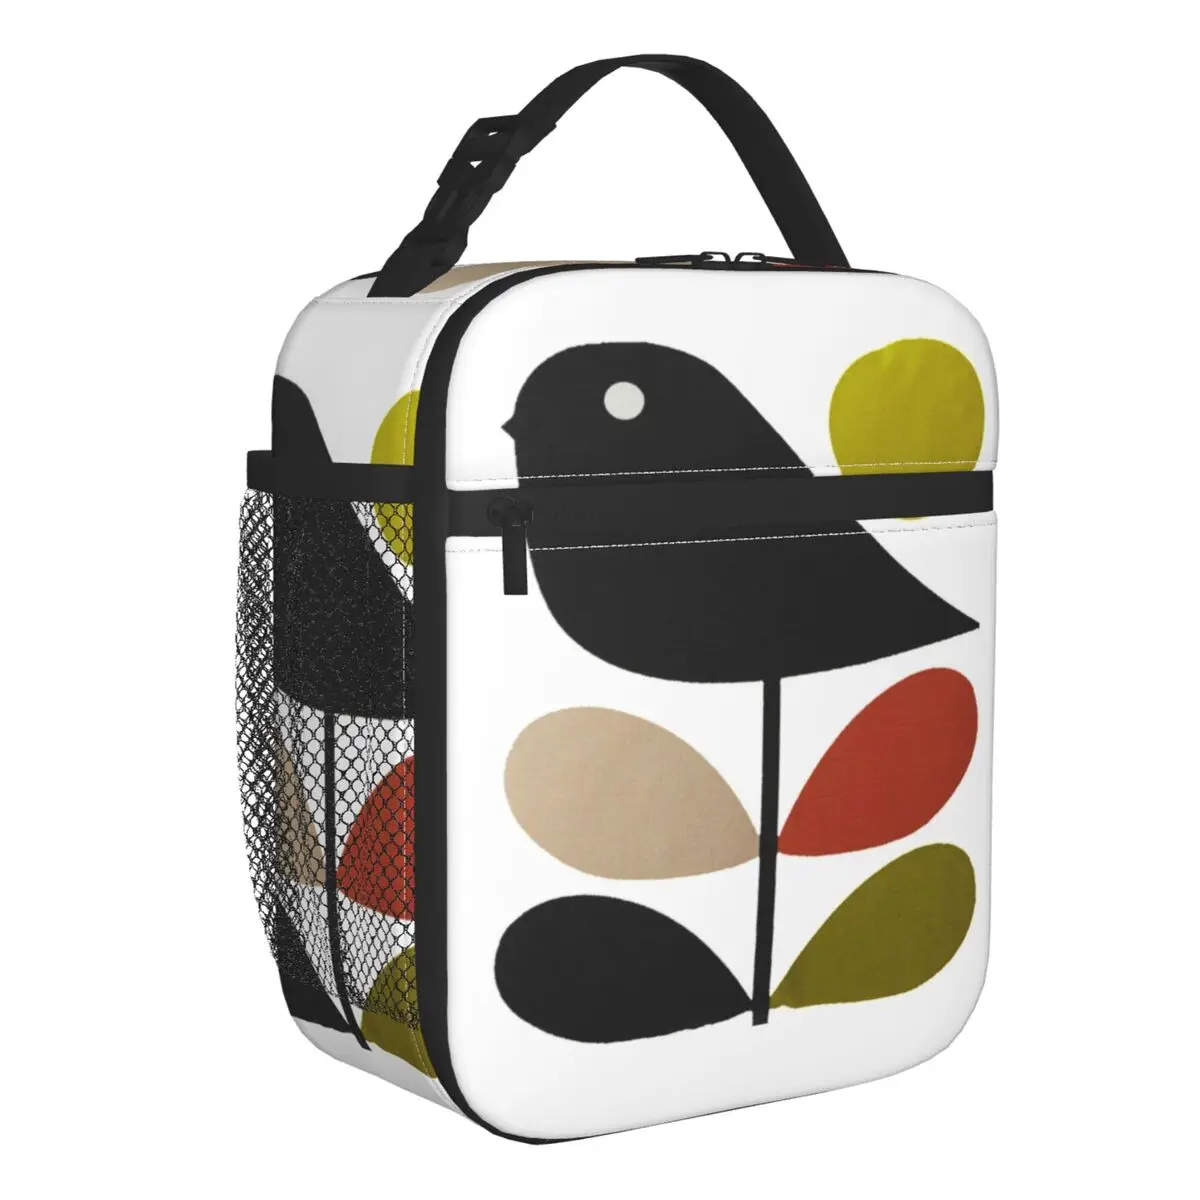 Orla Kiely Stem And Bird Insulated Lunch Bags Camping Travel Scandinavian Style Portable Cooler Thermal Bento Box Women Children